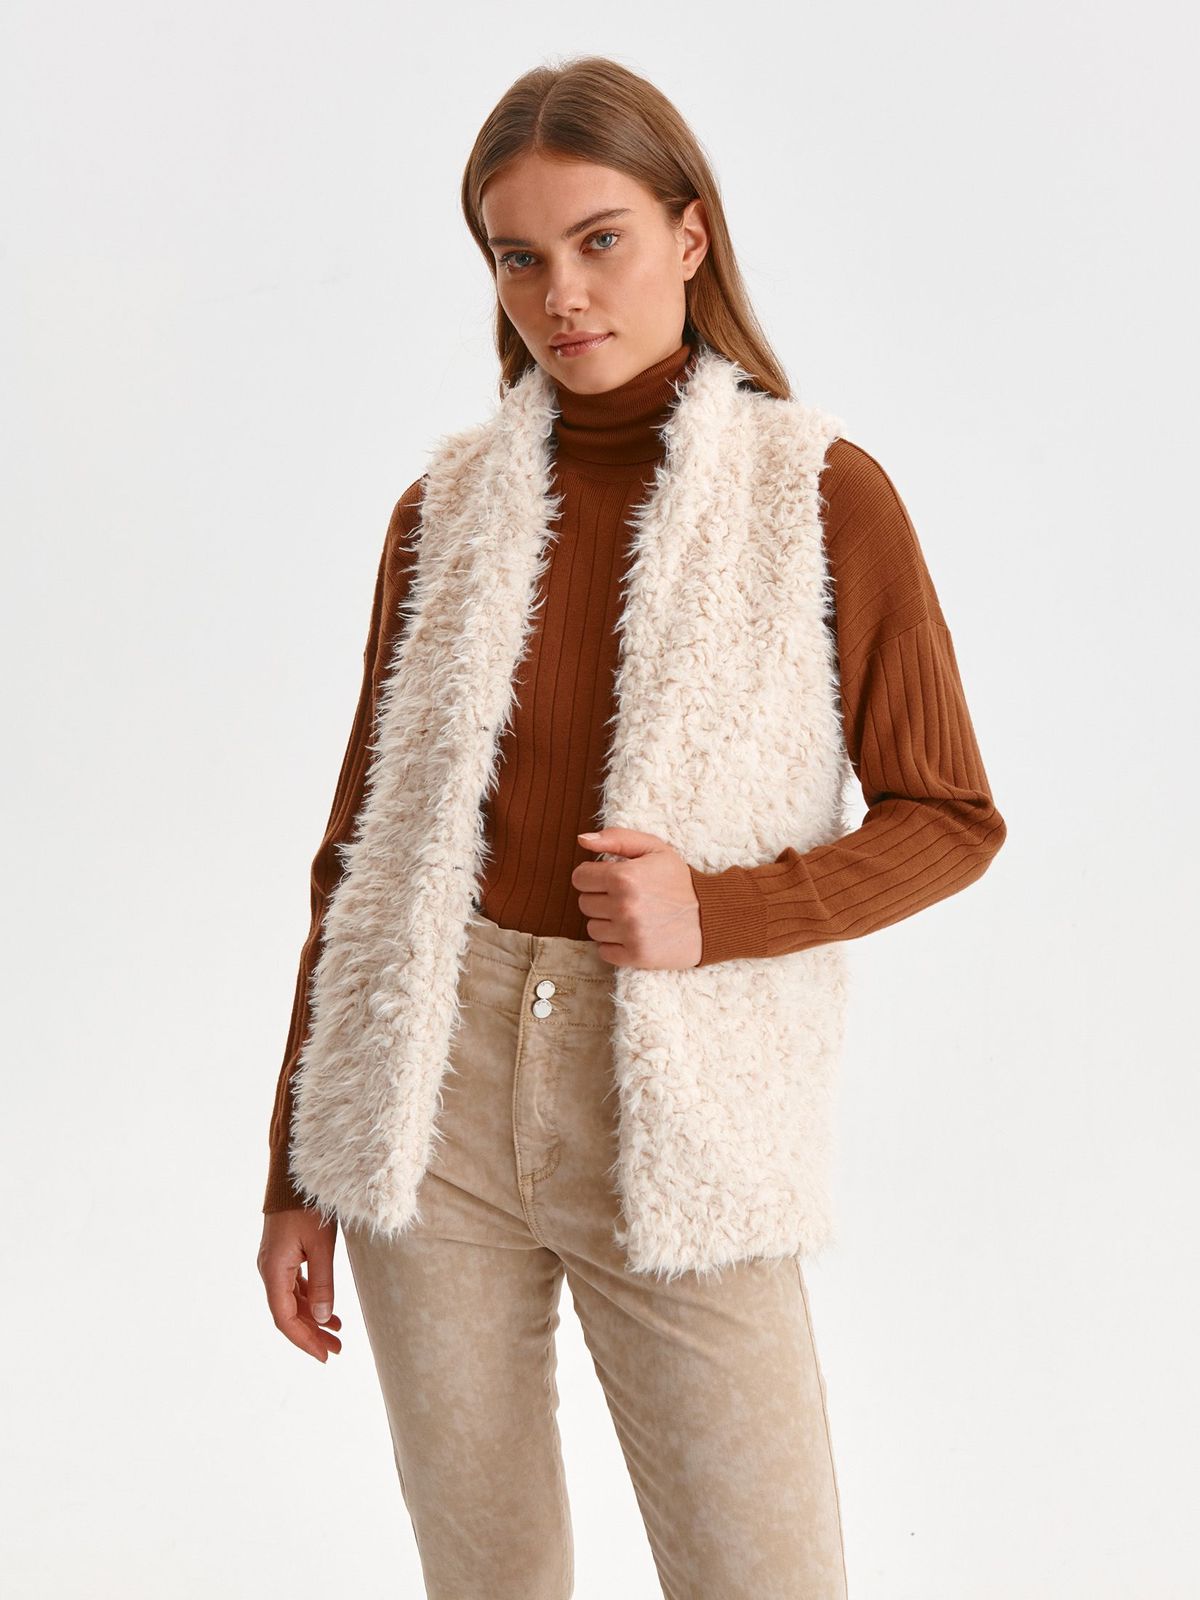 White gilet from fluffy fabric